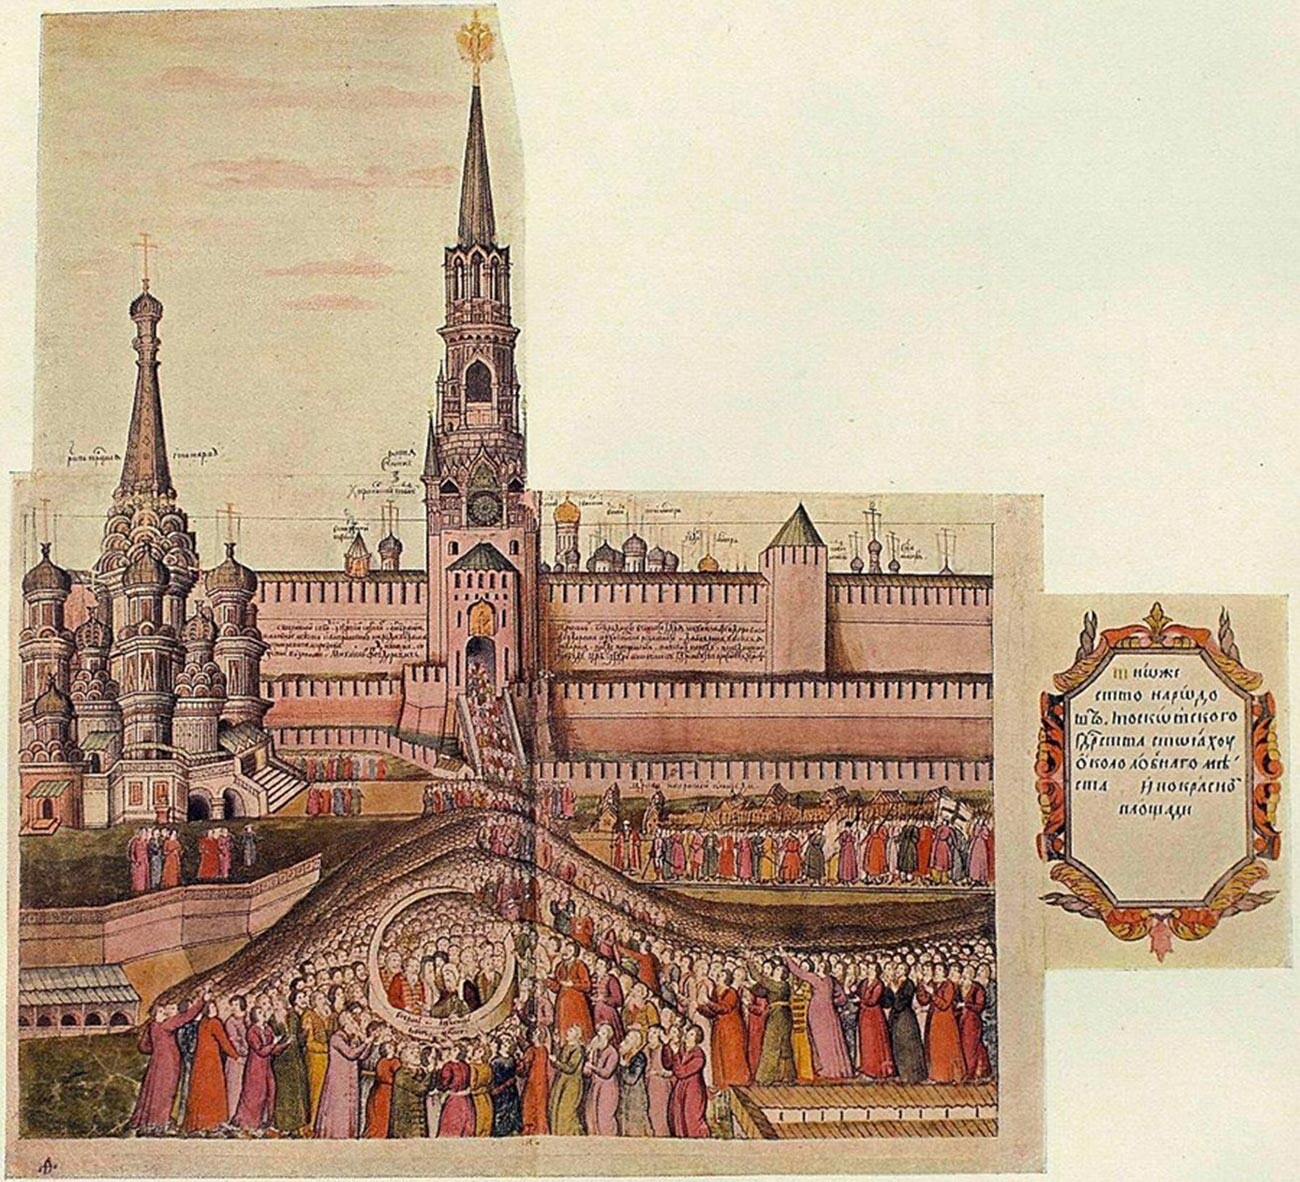 Red Square. Proclamation of Enthronement of Tsar Michael Romanov in 1613. St. Basil's on Red Square with Kremlin wall & Savior (Spassky) Tower. 1673 tinted engraving in P. G. Vasenko, Romanov Boyars and the Enthronement of Mikhail Fedorovich (St. Petersburg, 1913)